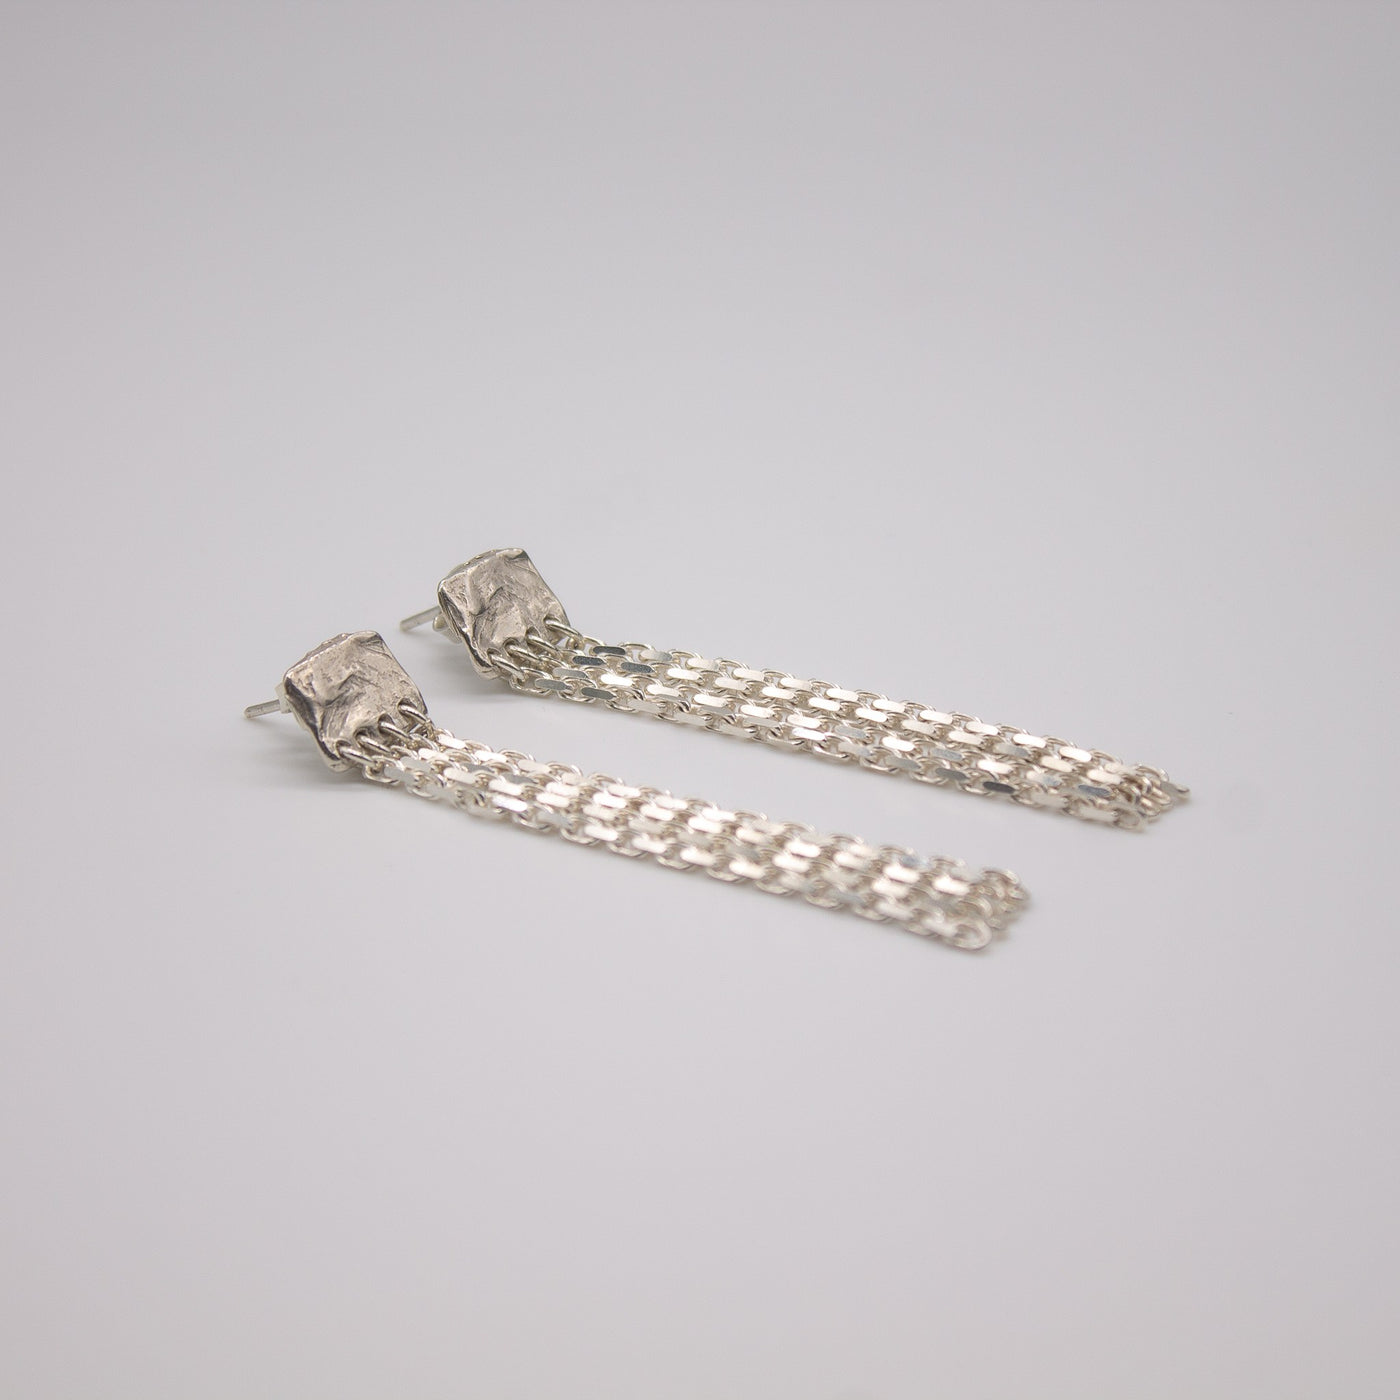 LUNDBY // Chain earrings with ear studs made of fine silver